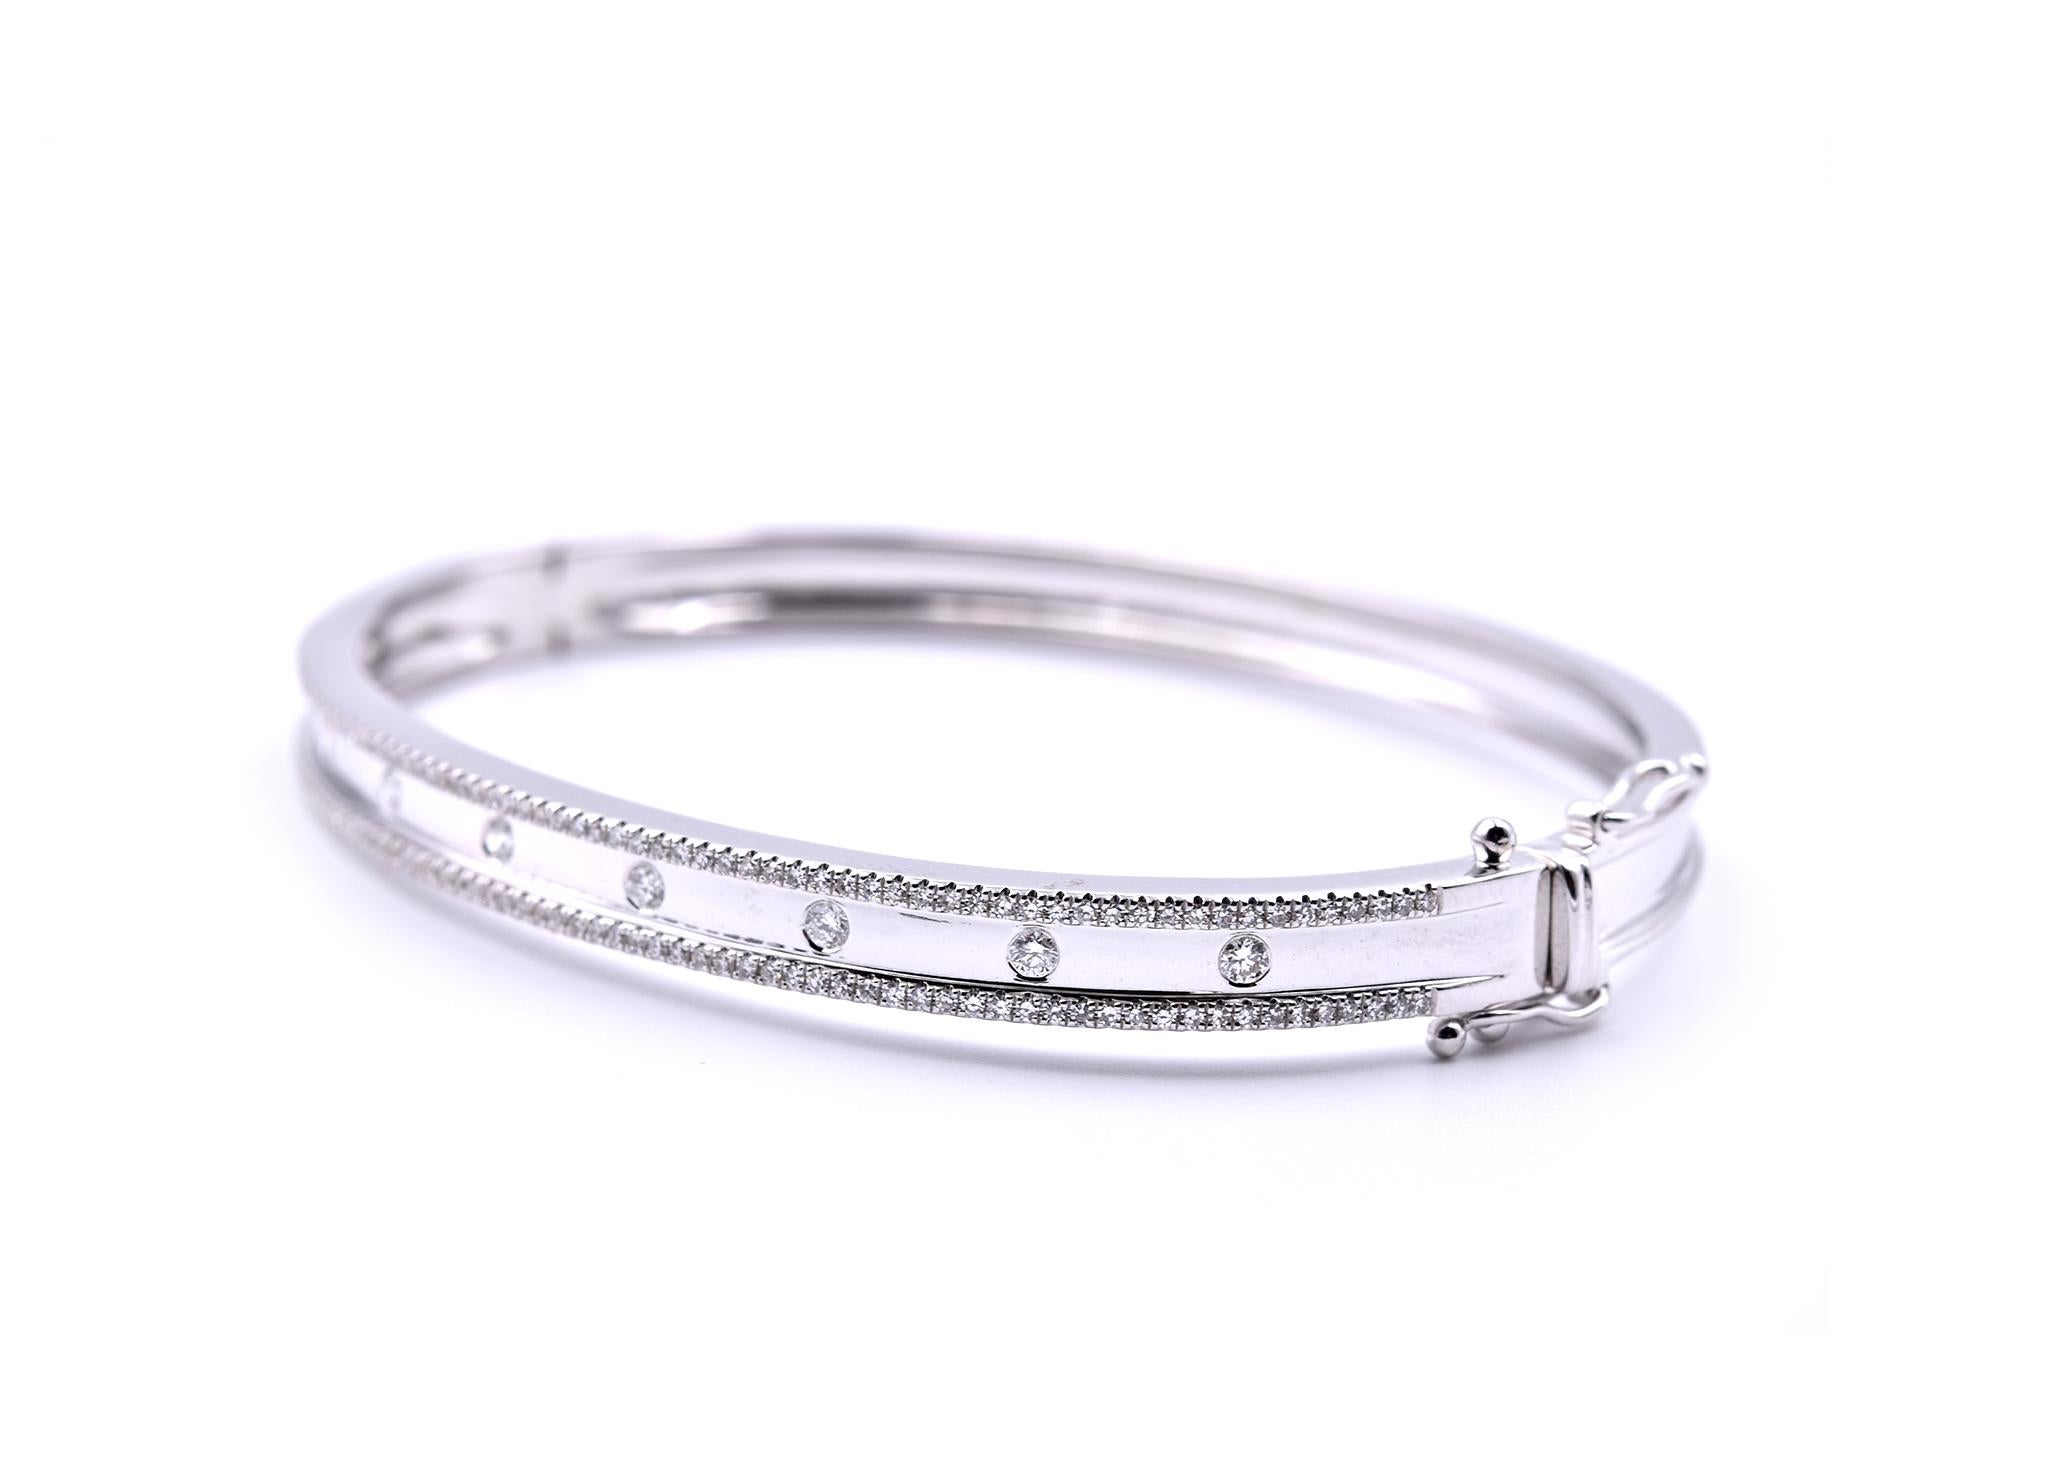 Designer: custom
Material: 14k white gold
Diamonds: round brilliant cut = .62cttw
Color: G
Clarity: VS
Dimensions: bangle will fit a 6 ½ -inch wrist
Weight: 16.56 grams
